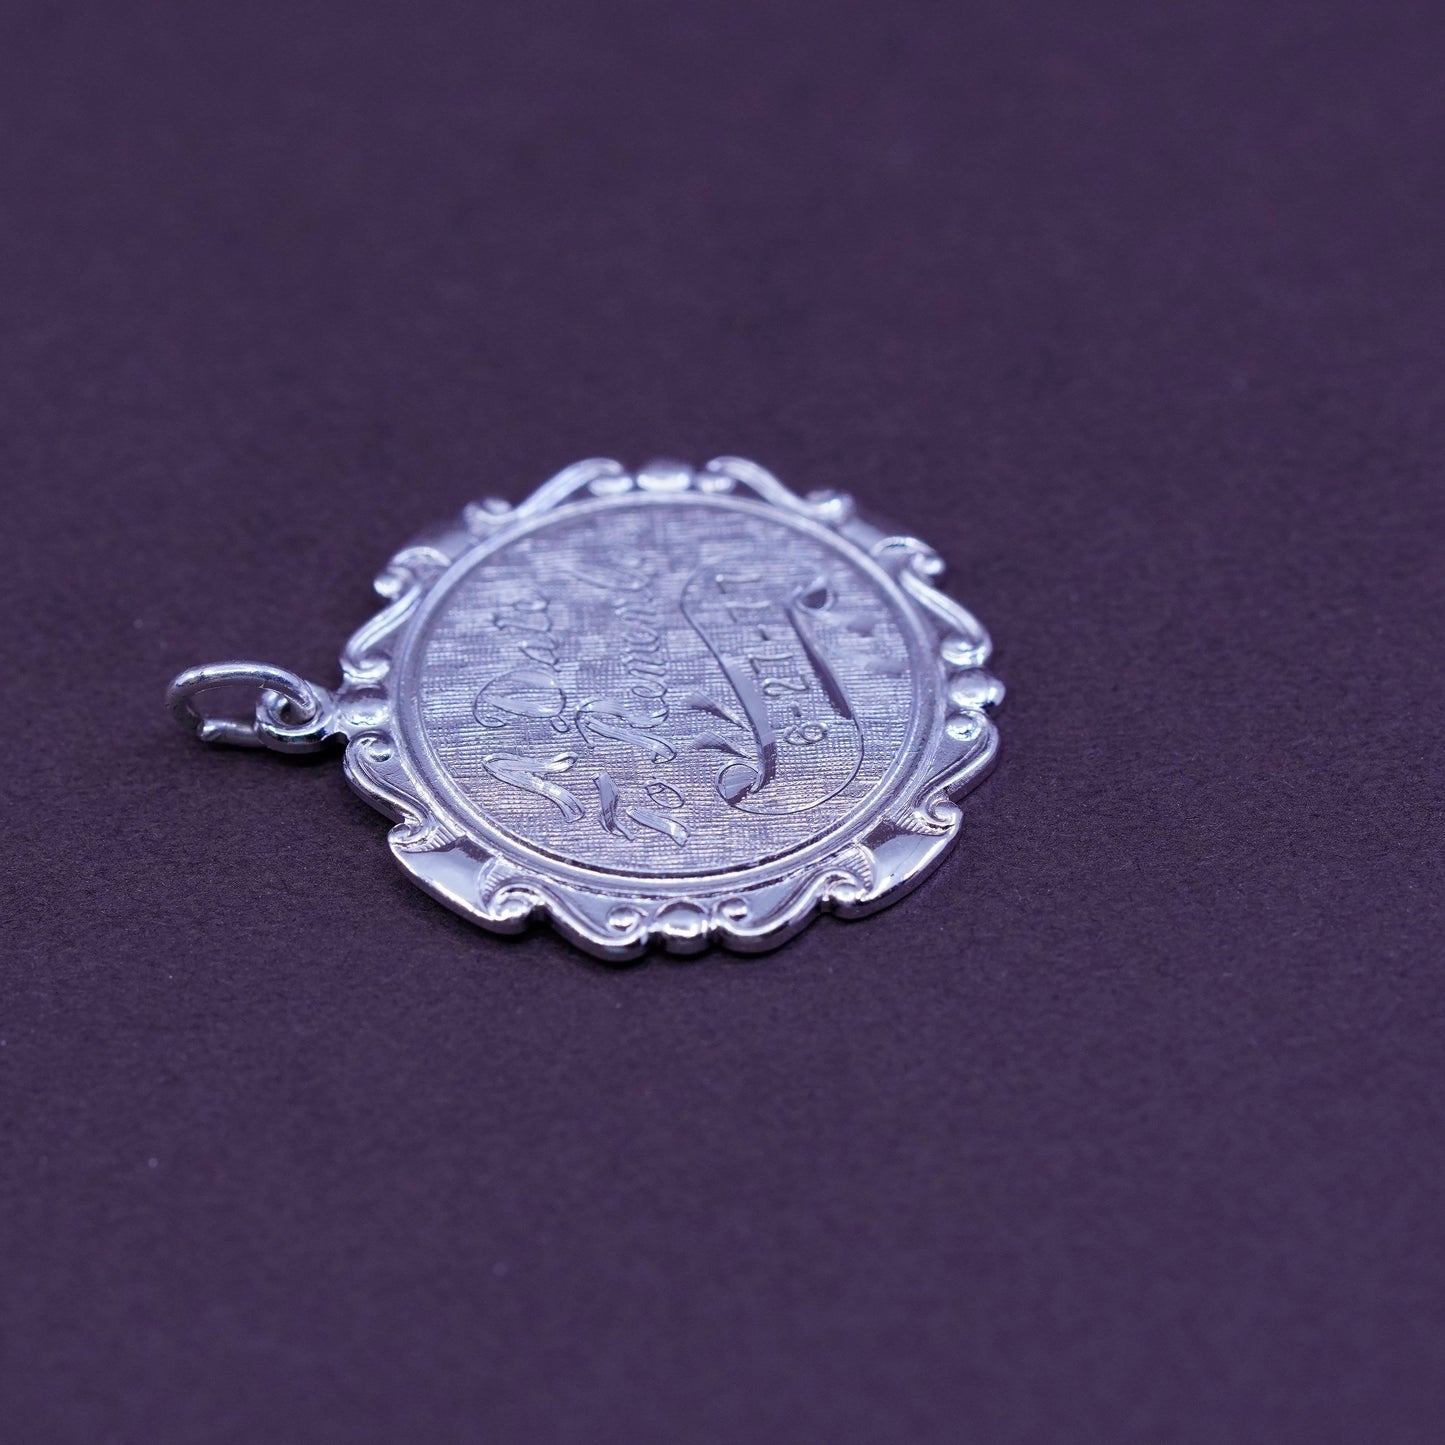 Vintage Sterling silver handmade charm, 925 pendant engraved “a day to remember